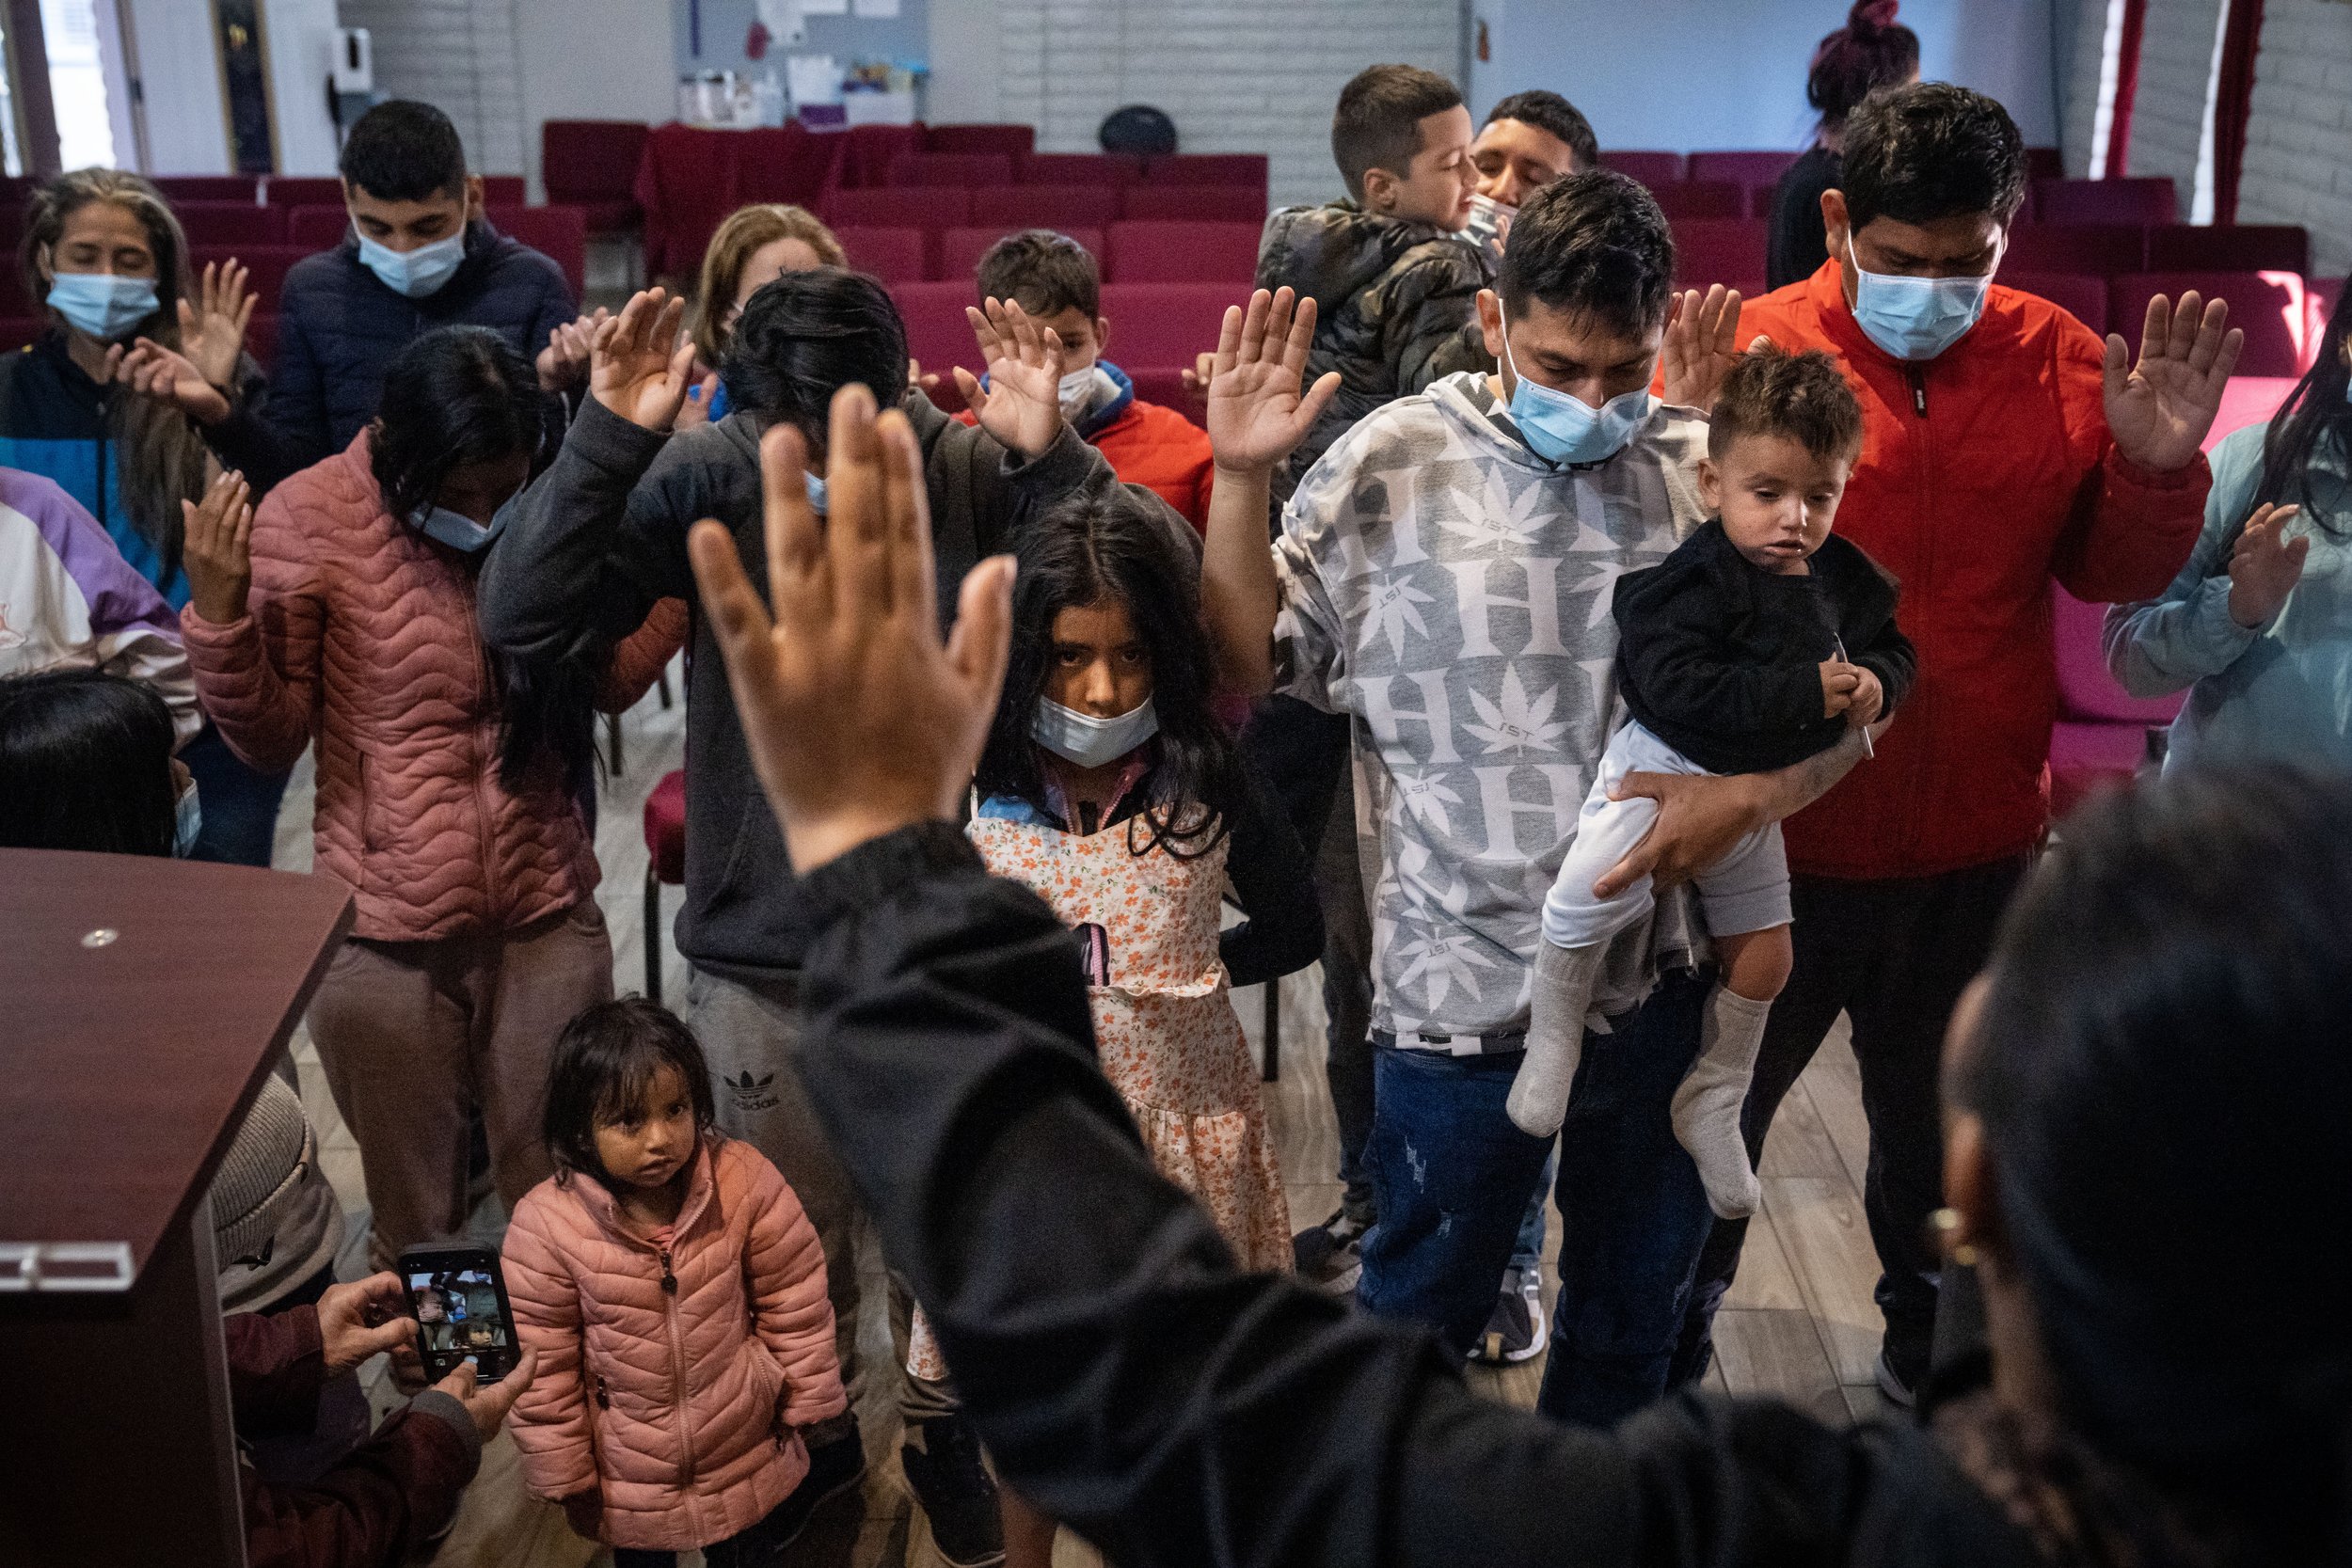  Pastor Hector Ramirez leads a prayer to protect a group of migrants on their journeys after they arrived to Iglesia Cristiana El Buen Pastor on Thursday, Dec. 22, 2022, in Mesa. The group of migrants from various Central and South American countries